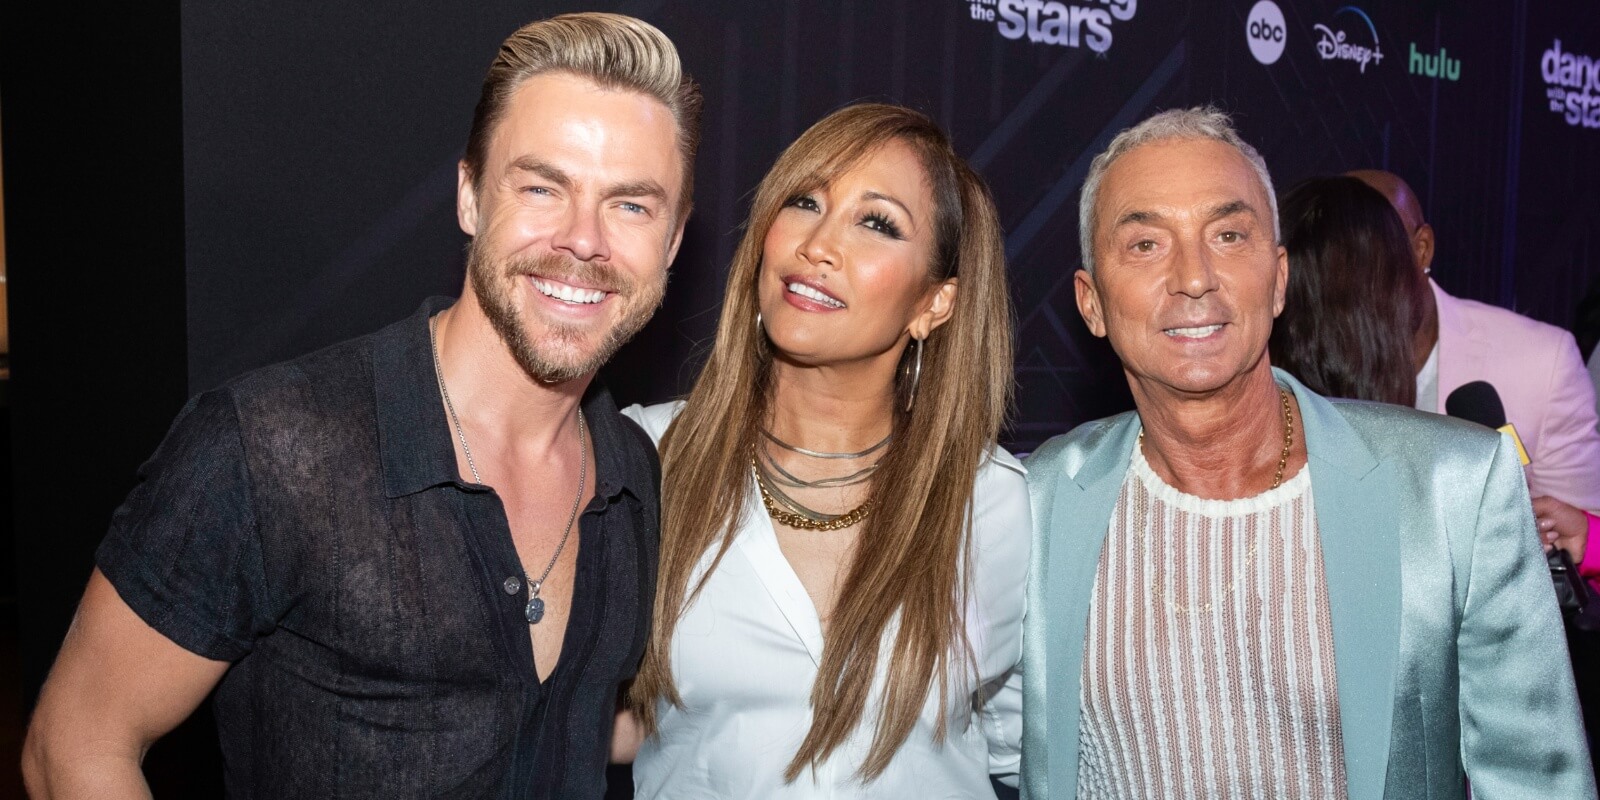 Derek Hough, Carrie Ann Inaba, and Bruno Tonioli judge ABC's 'Dancing With the Stars.'